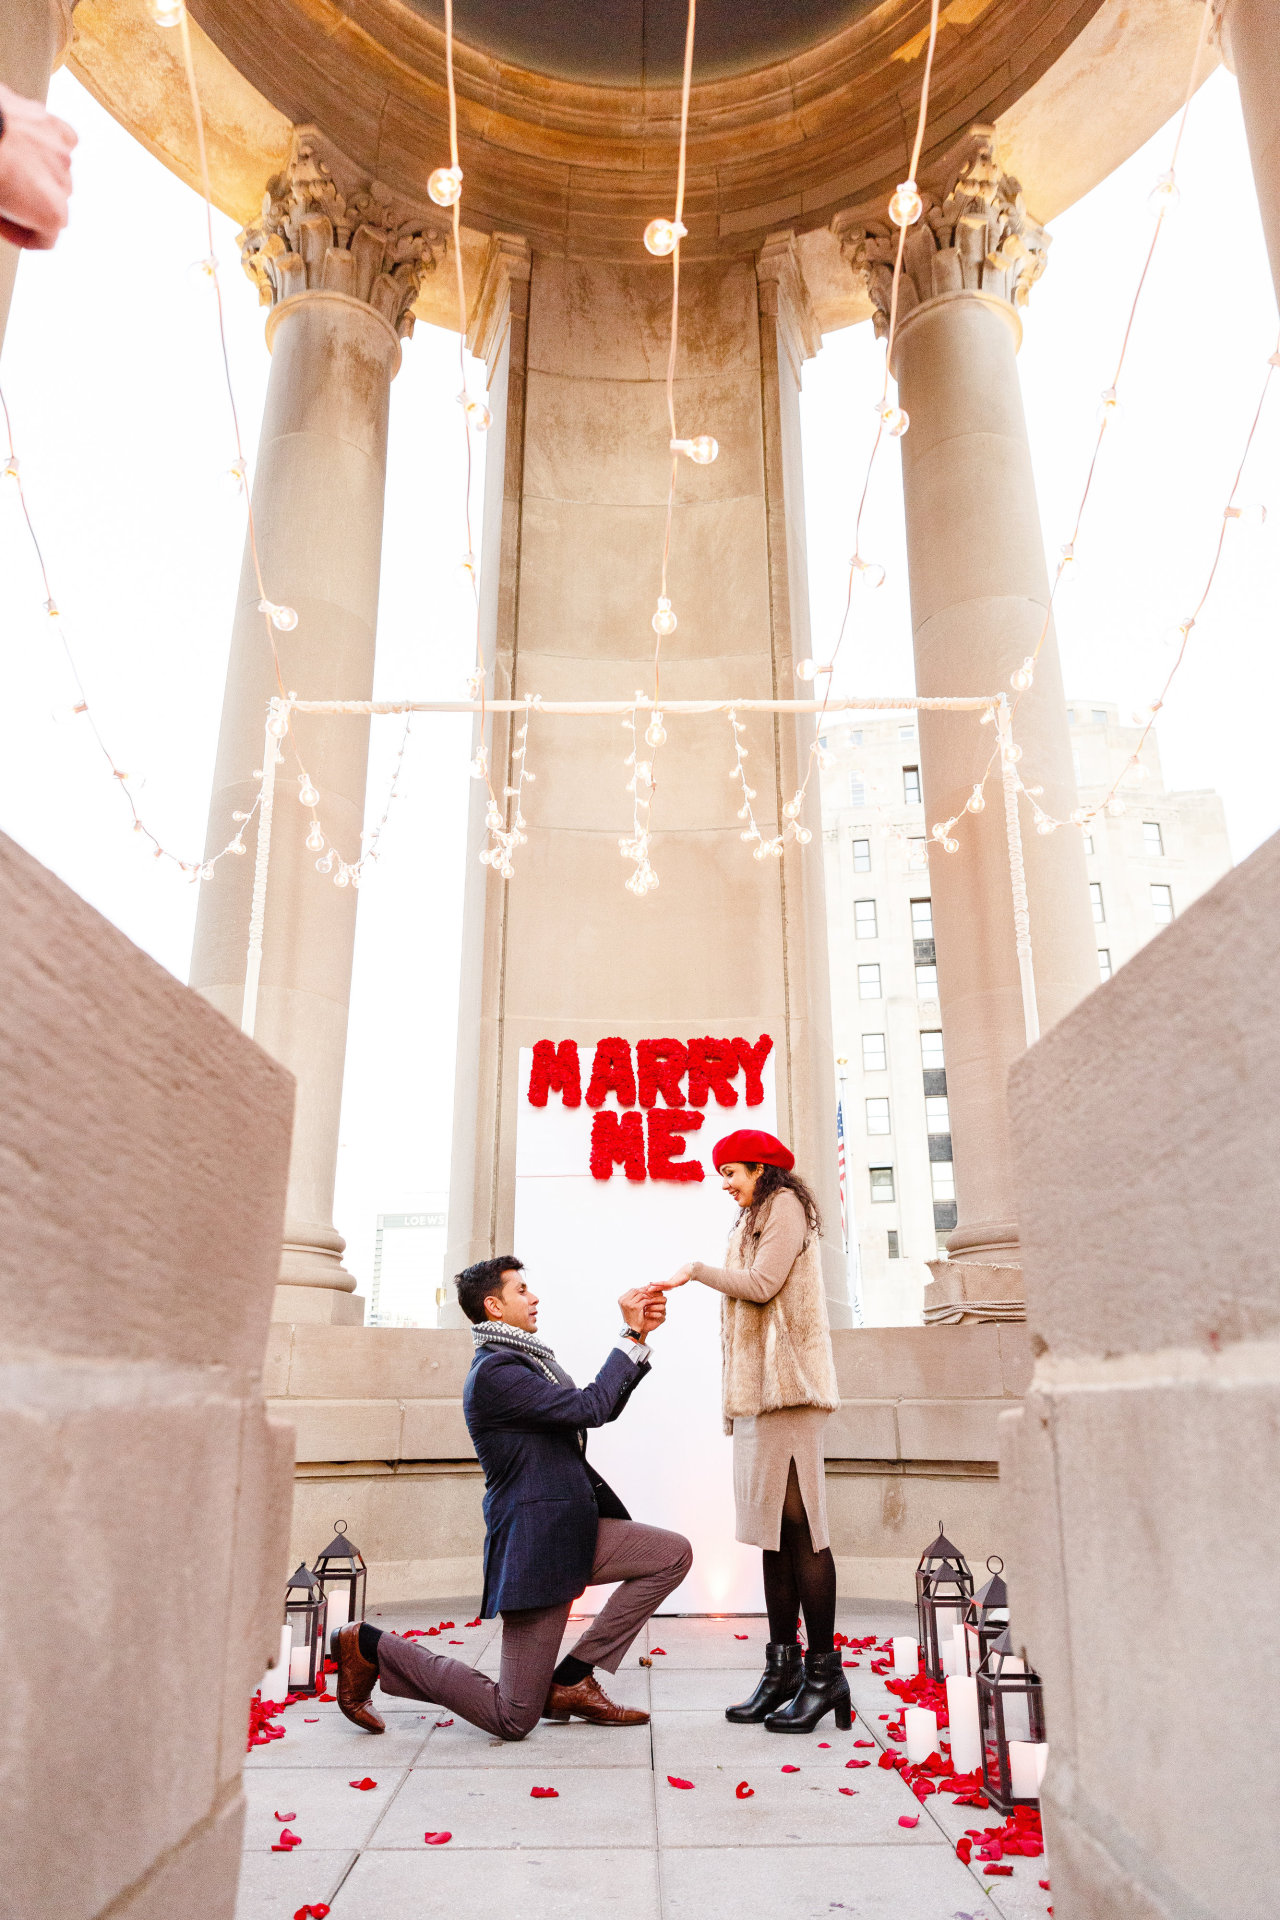 Romantic marriage proposal in the LondonHouse Cupola in downtown Chicago